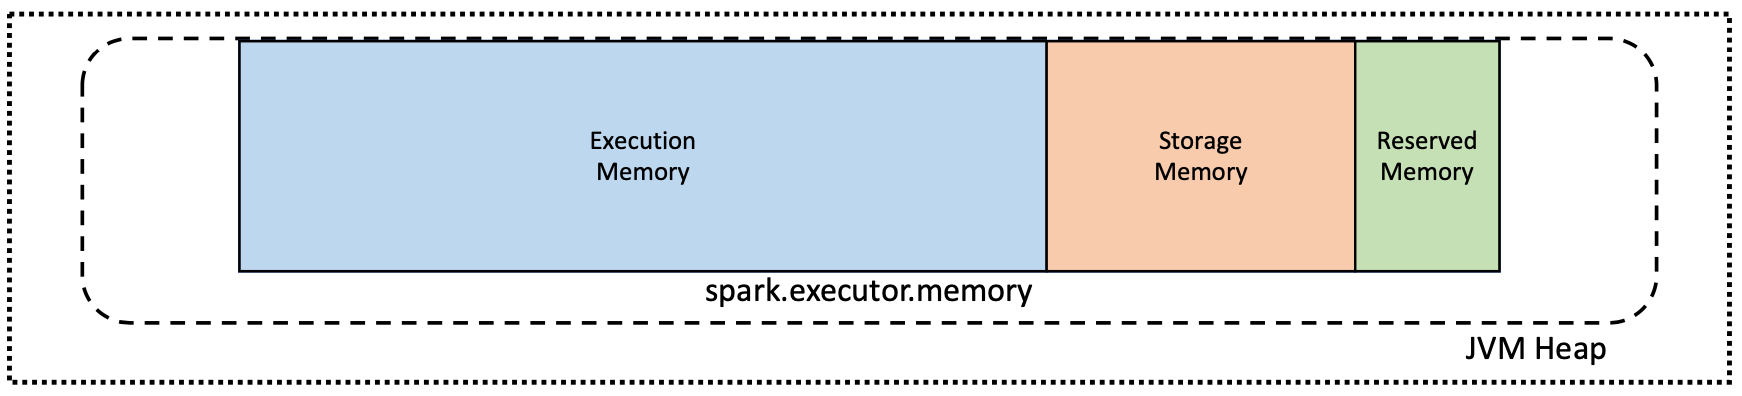 Memory configuration with spark executor memory property